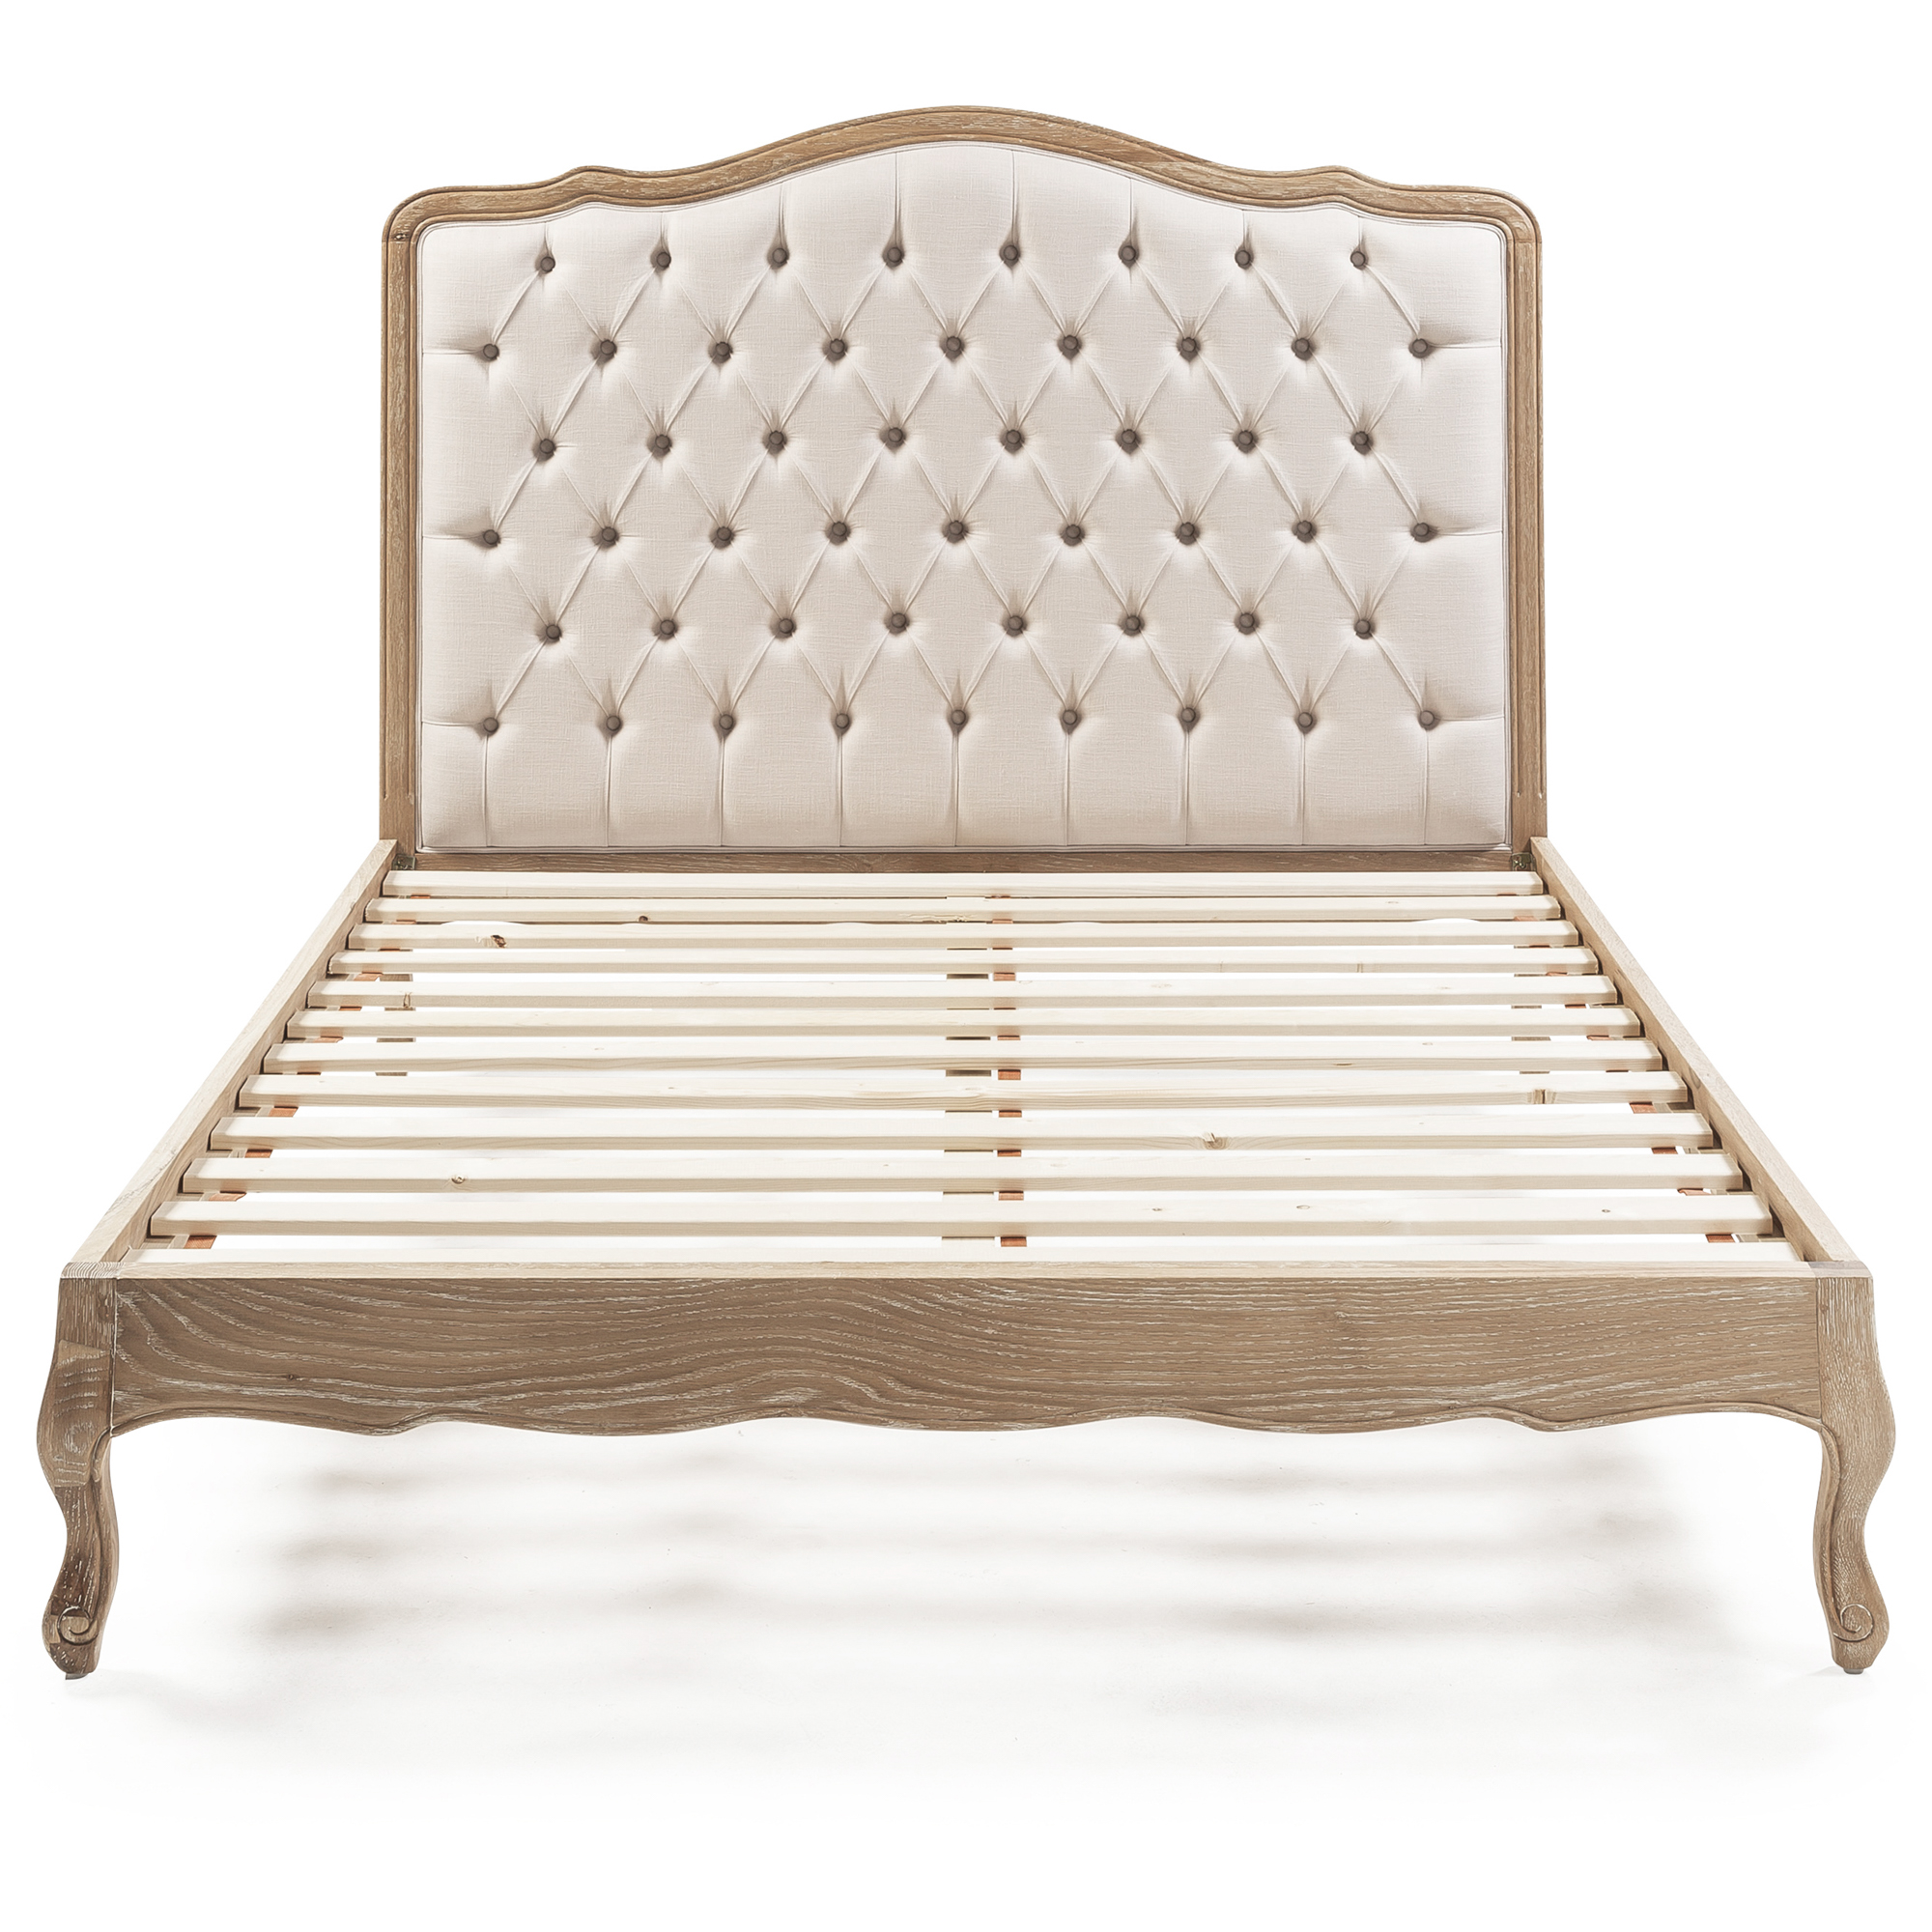 Eléa French Weathered Limed Oak Super King Size Bed with Upholstered Button Back Headboard